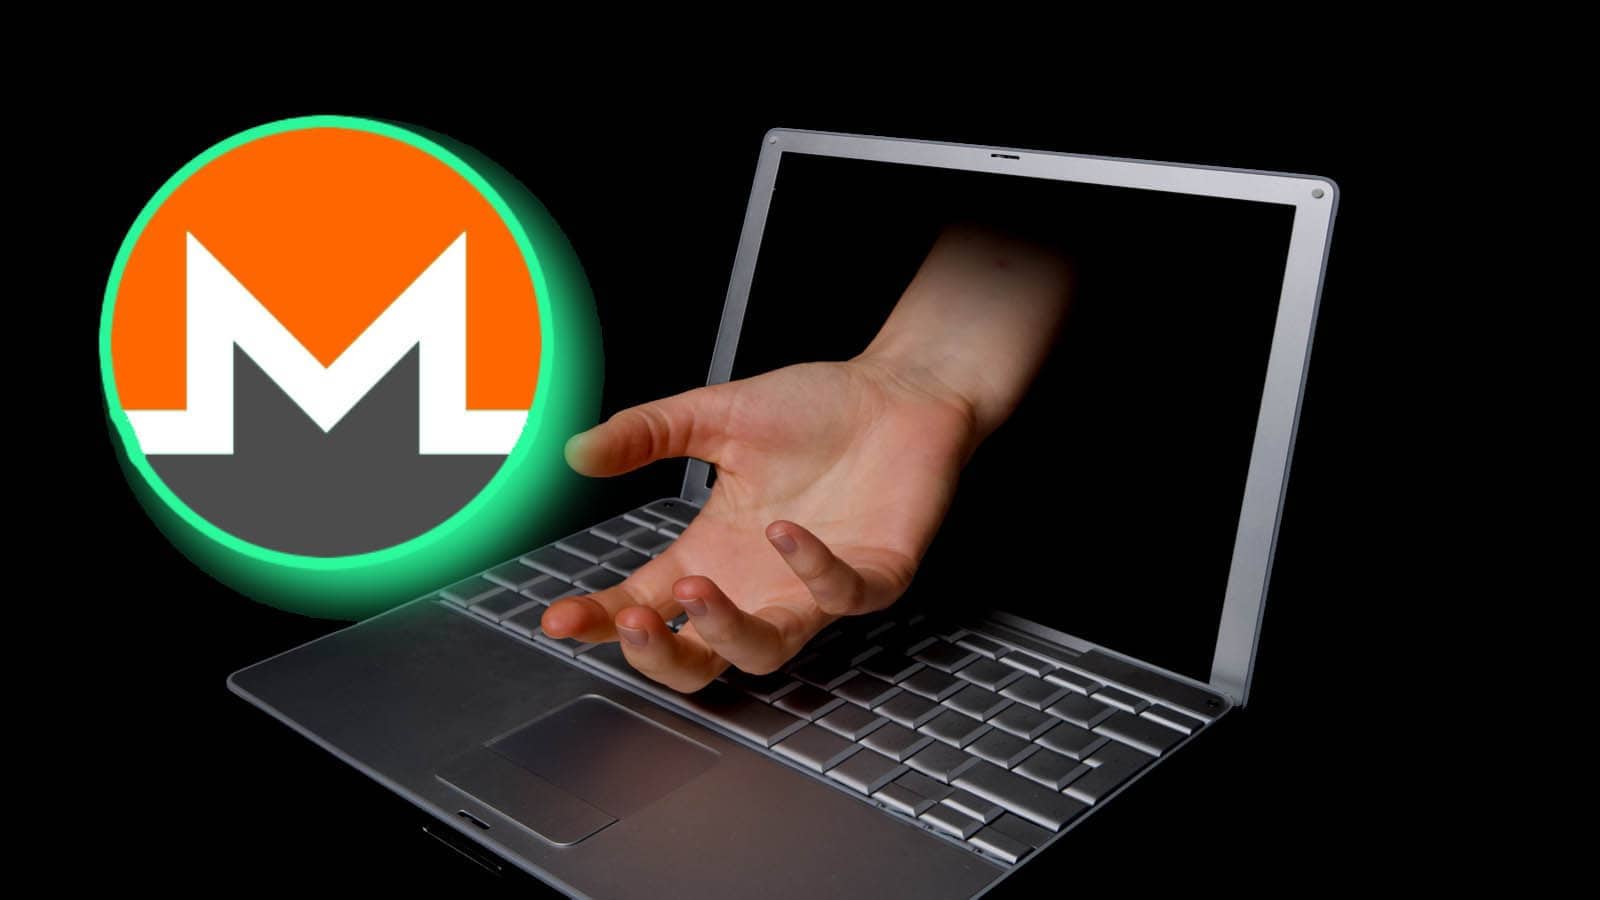 85% Of All Illegal Crypto Mining Targets Monero, According To Report